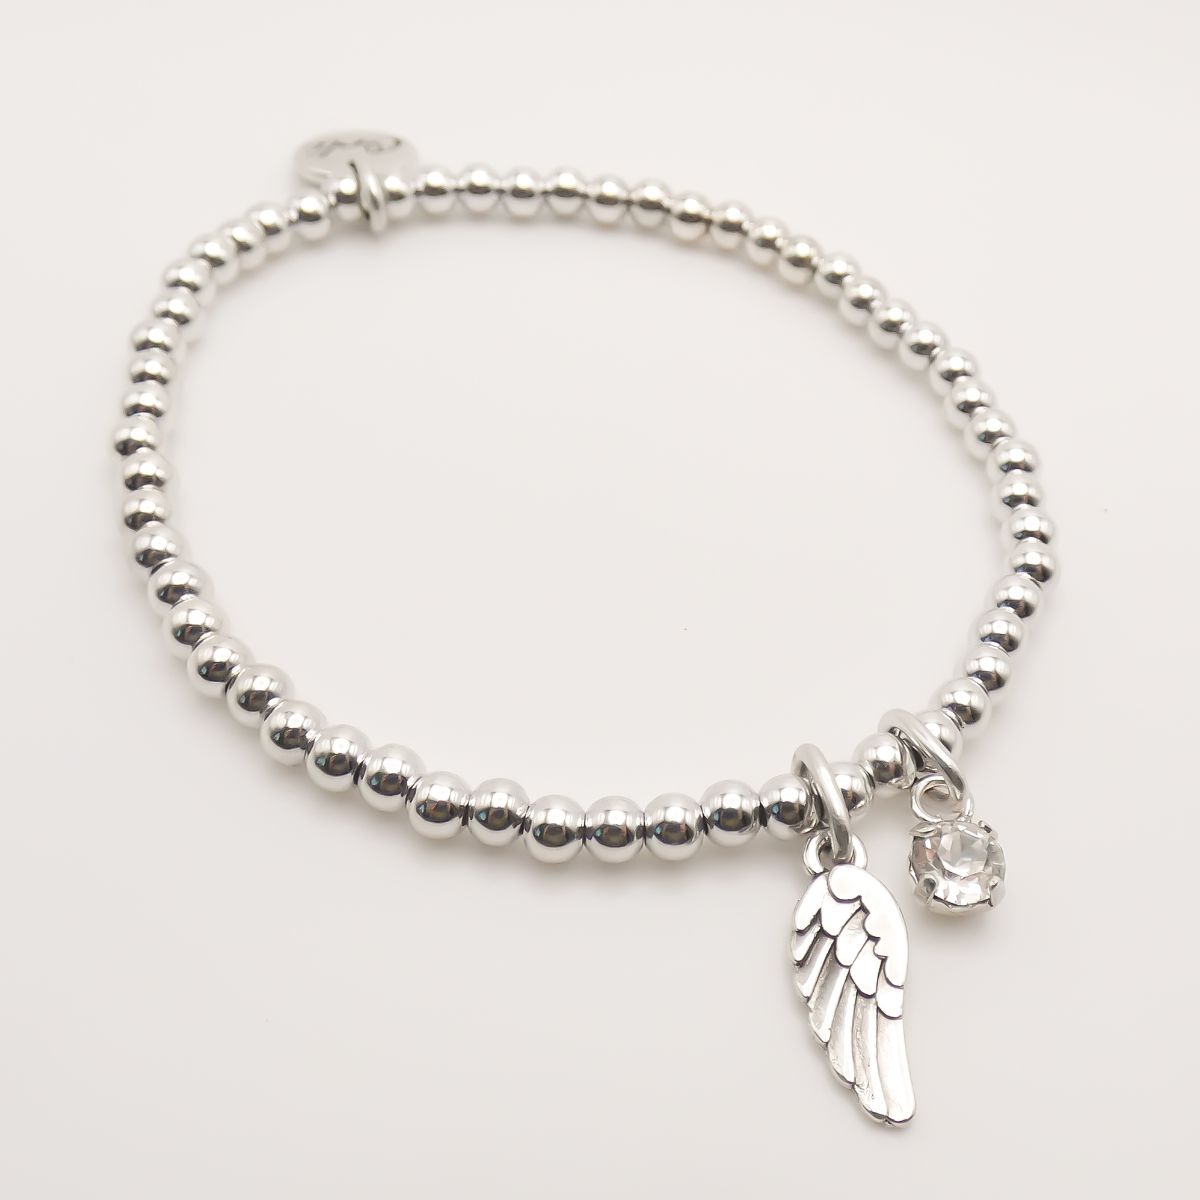 Angel Wings Charm with Blue Opalescent Beads Charity Bracelet – HELP by TJ